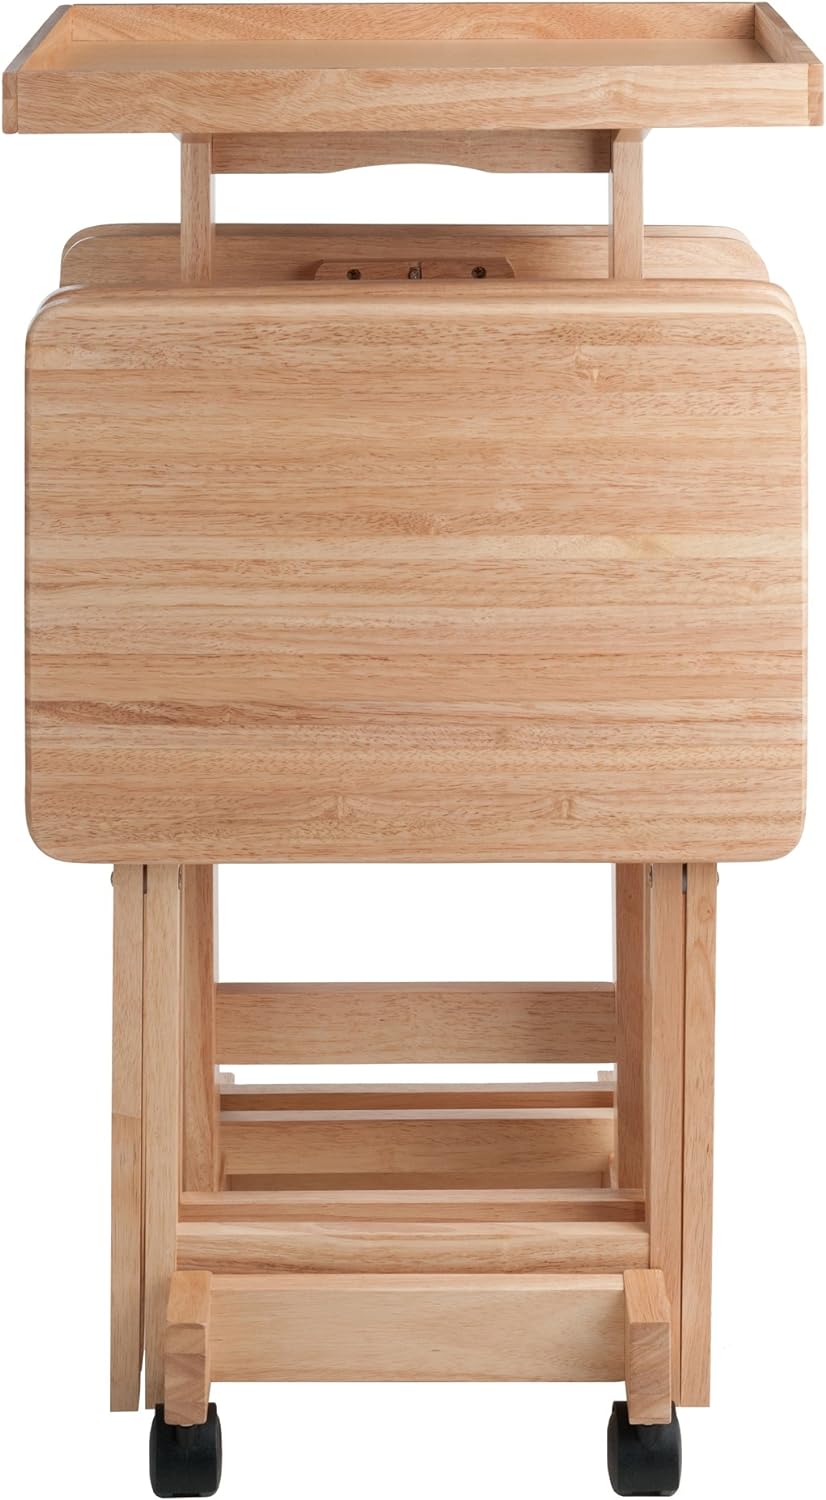 Winsome Isabelle Snack table, Walnut 19.69x15.91x36.22